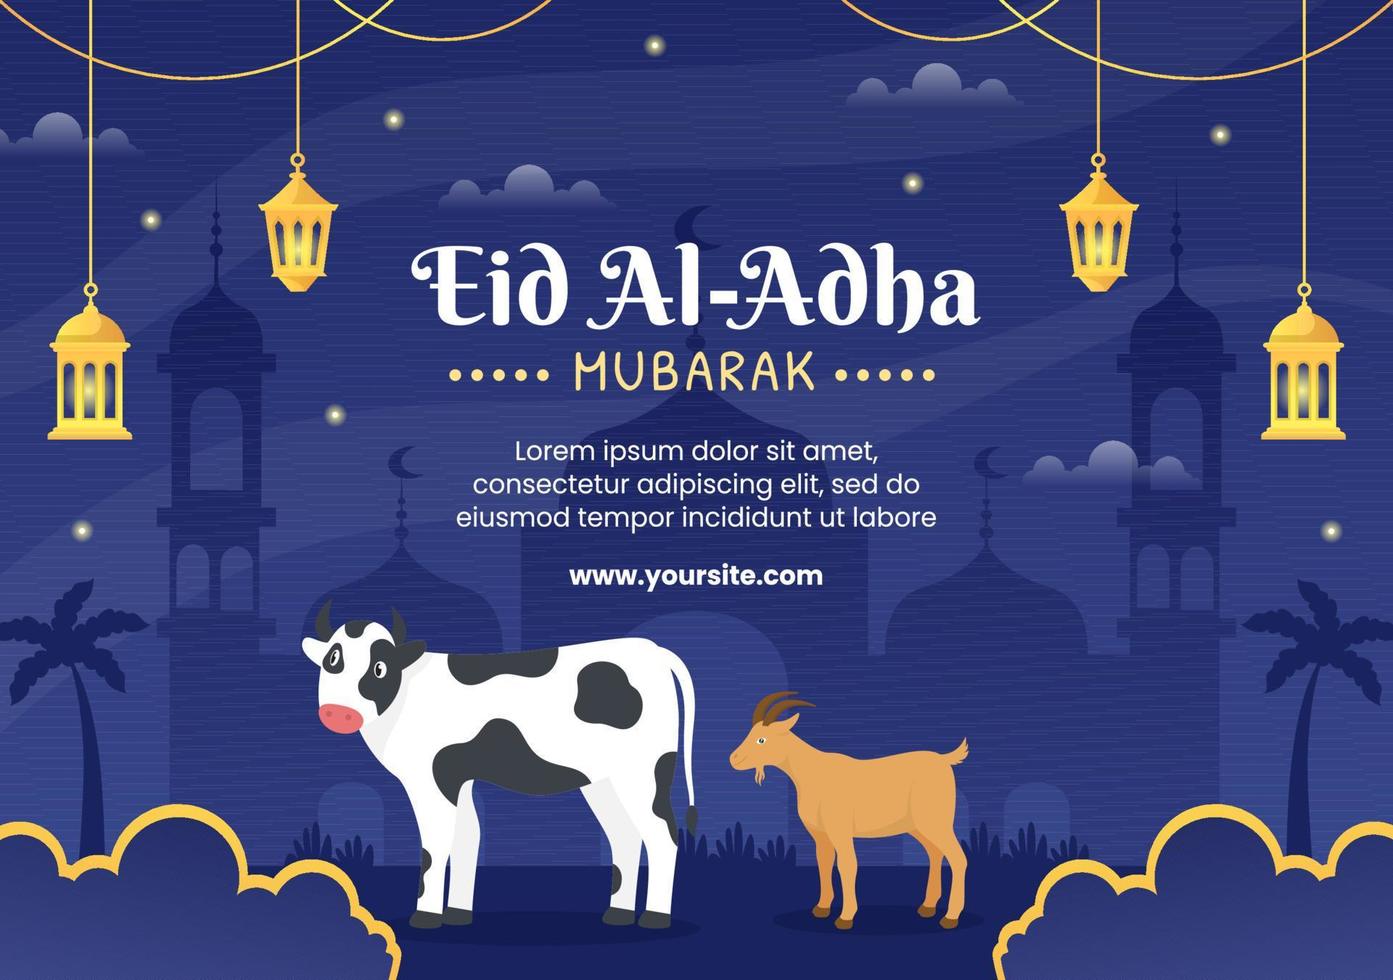 Eid al Adha Template Flat Design Illustration Editable of Square Background Suitable for Social Media or Greeting Card vector